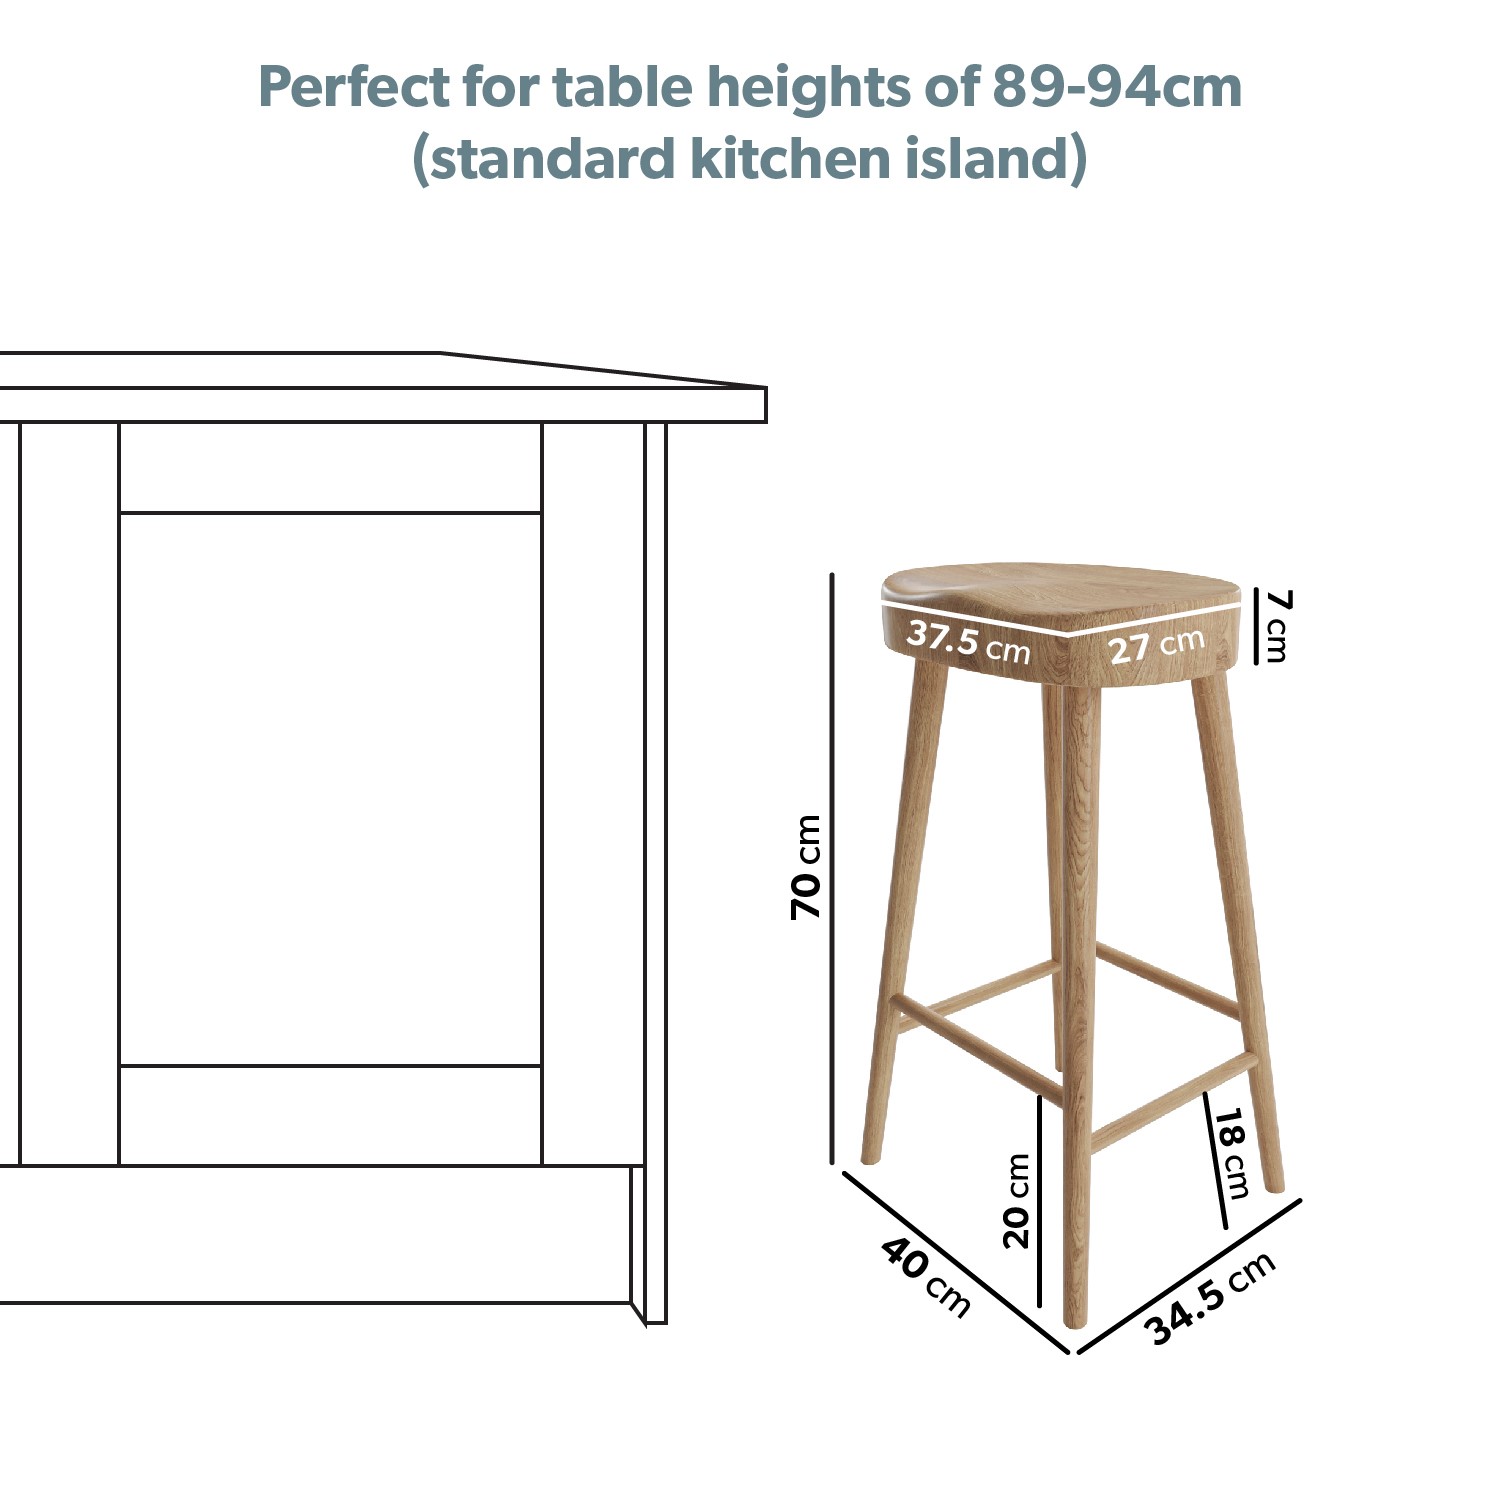 Read more about Solid oak kitchen stool 70cm rayne